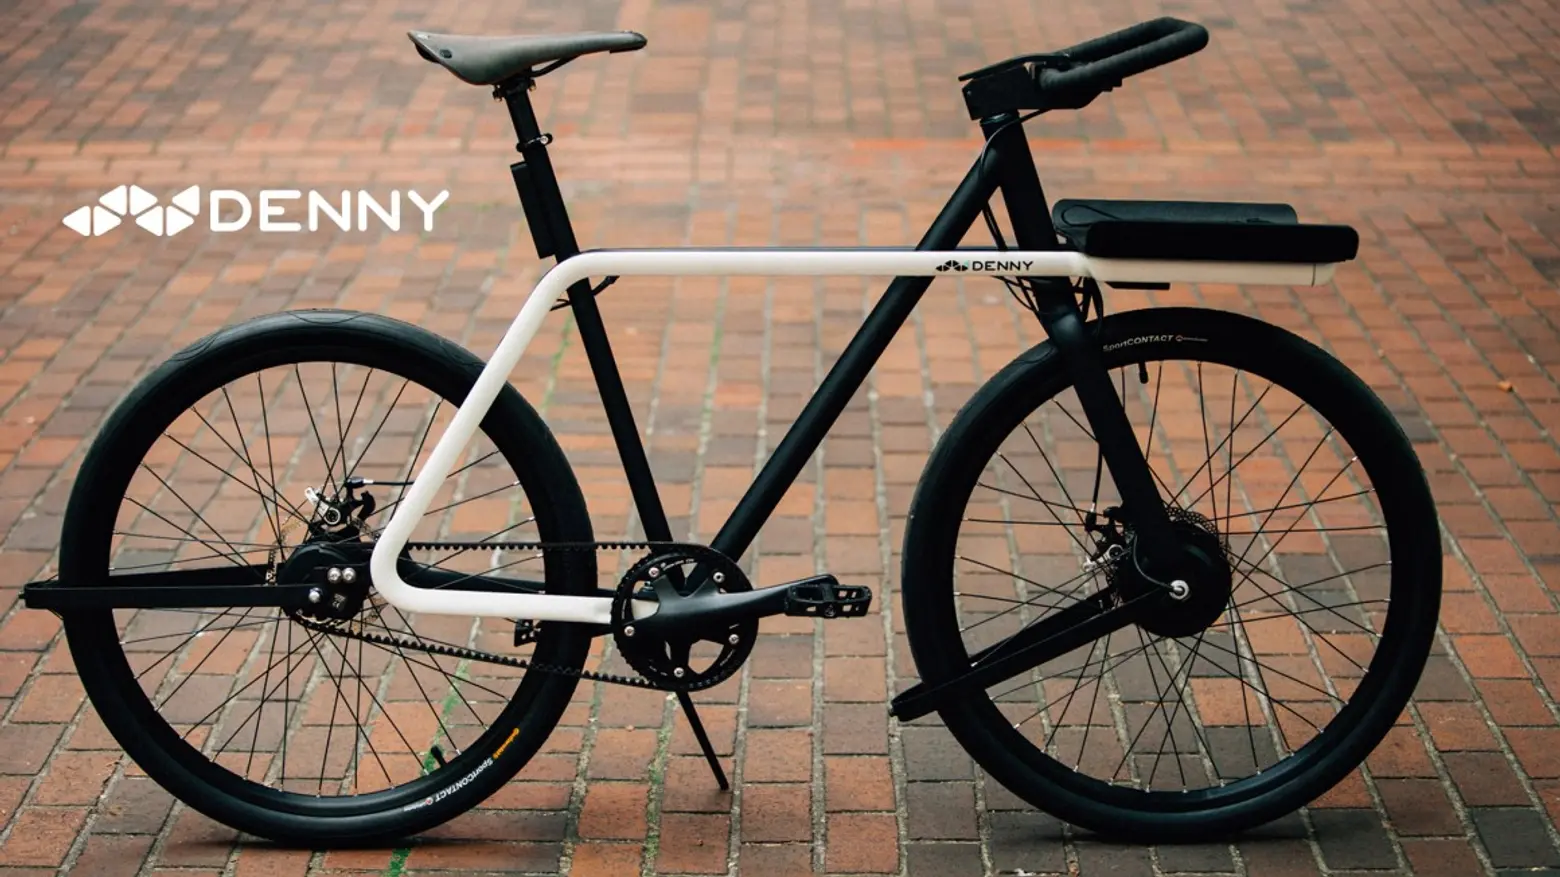 Daily Link Fix: The Super Sleek “Bike of the Future”; 140 Characters About Life in NYC